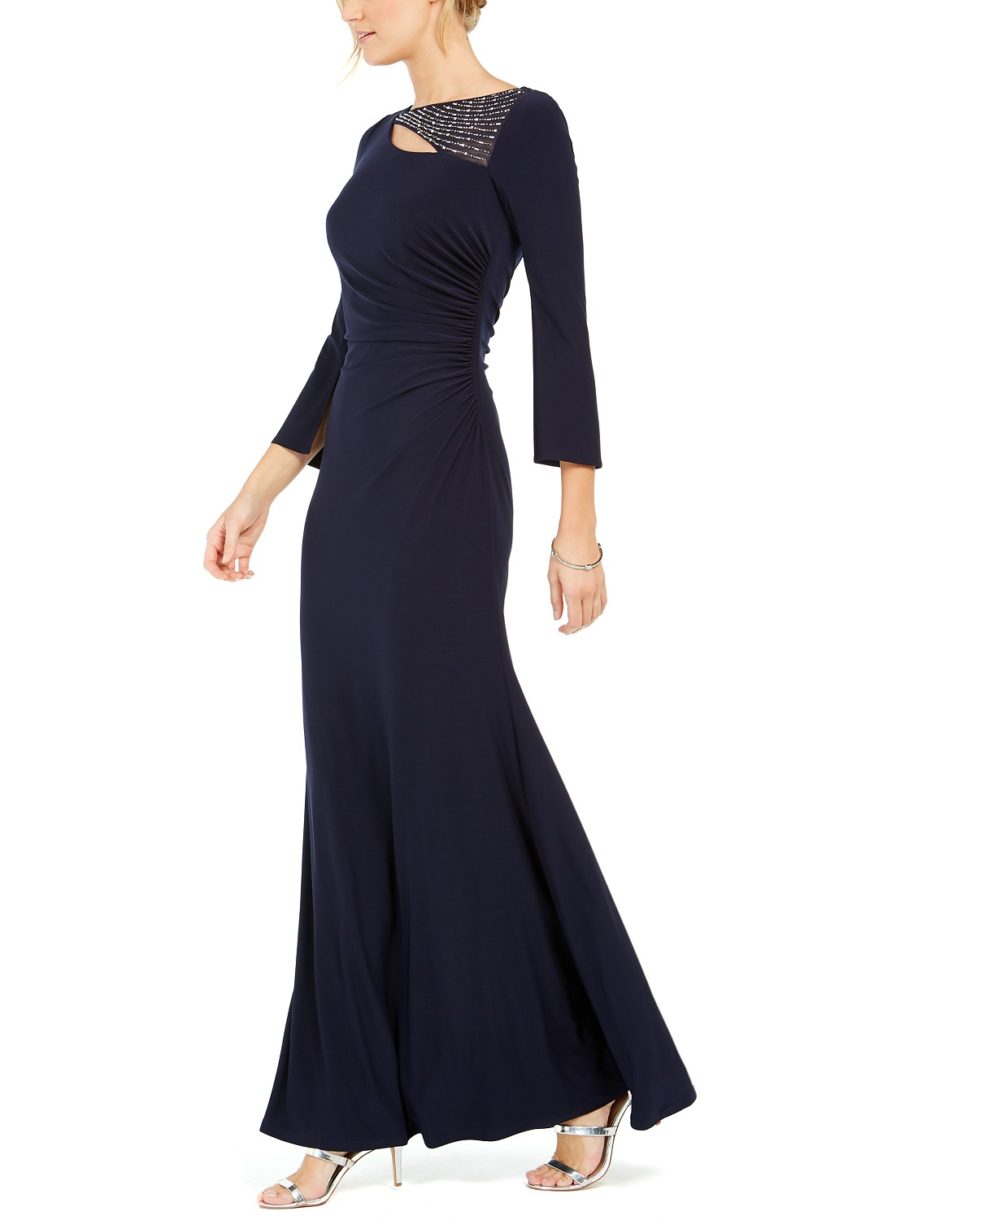 woocommerce-673321-2209615.cloudwaysapps.com-vince-camuto-womens-petite-navy-embellished-keyhole-gown-dress